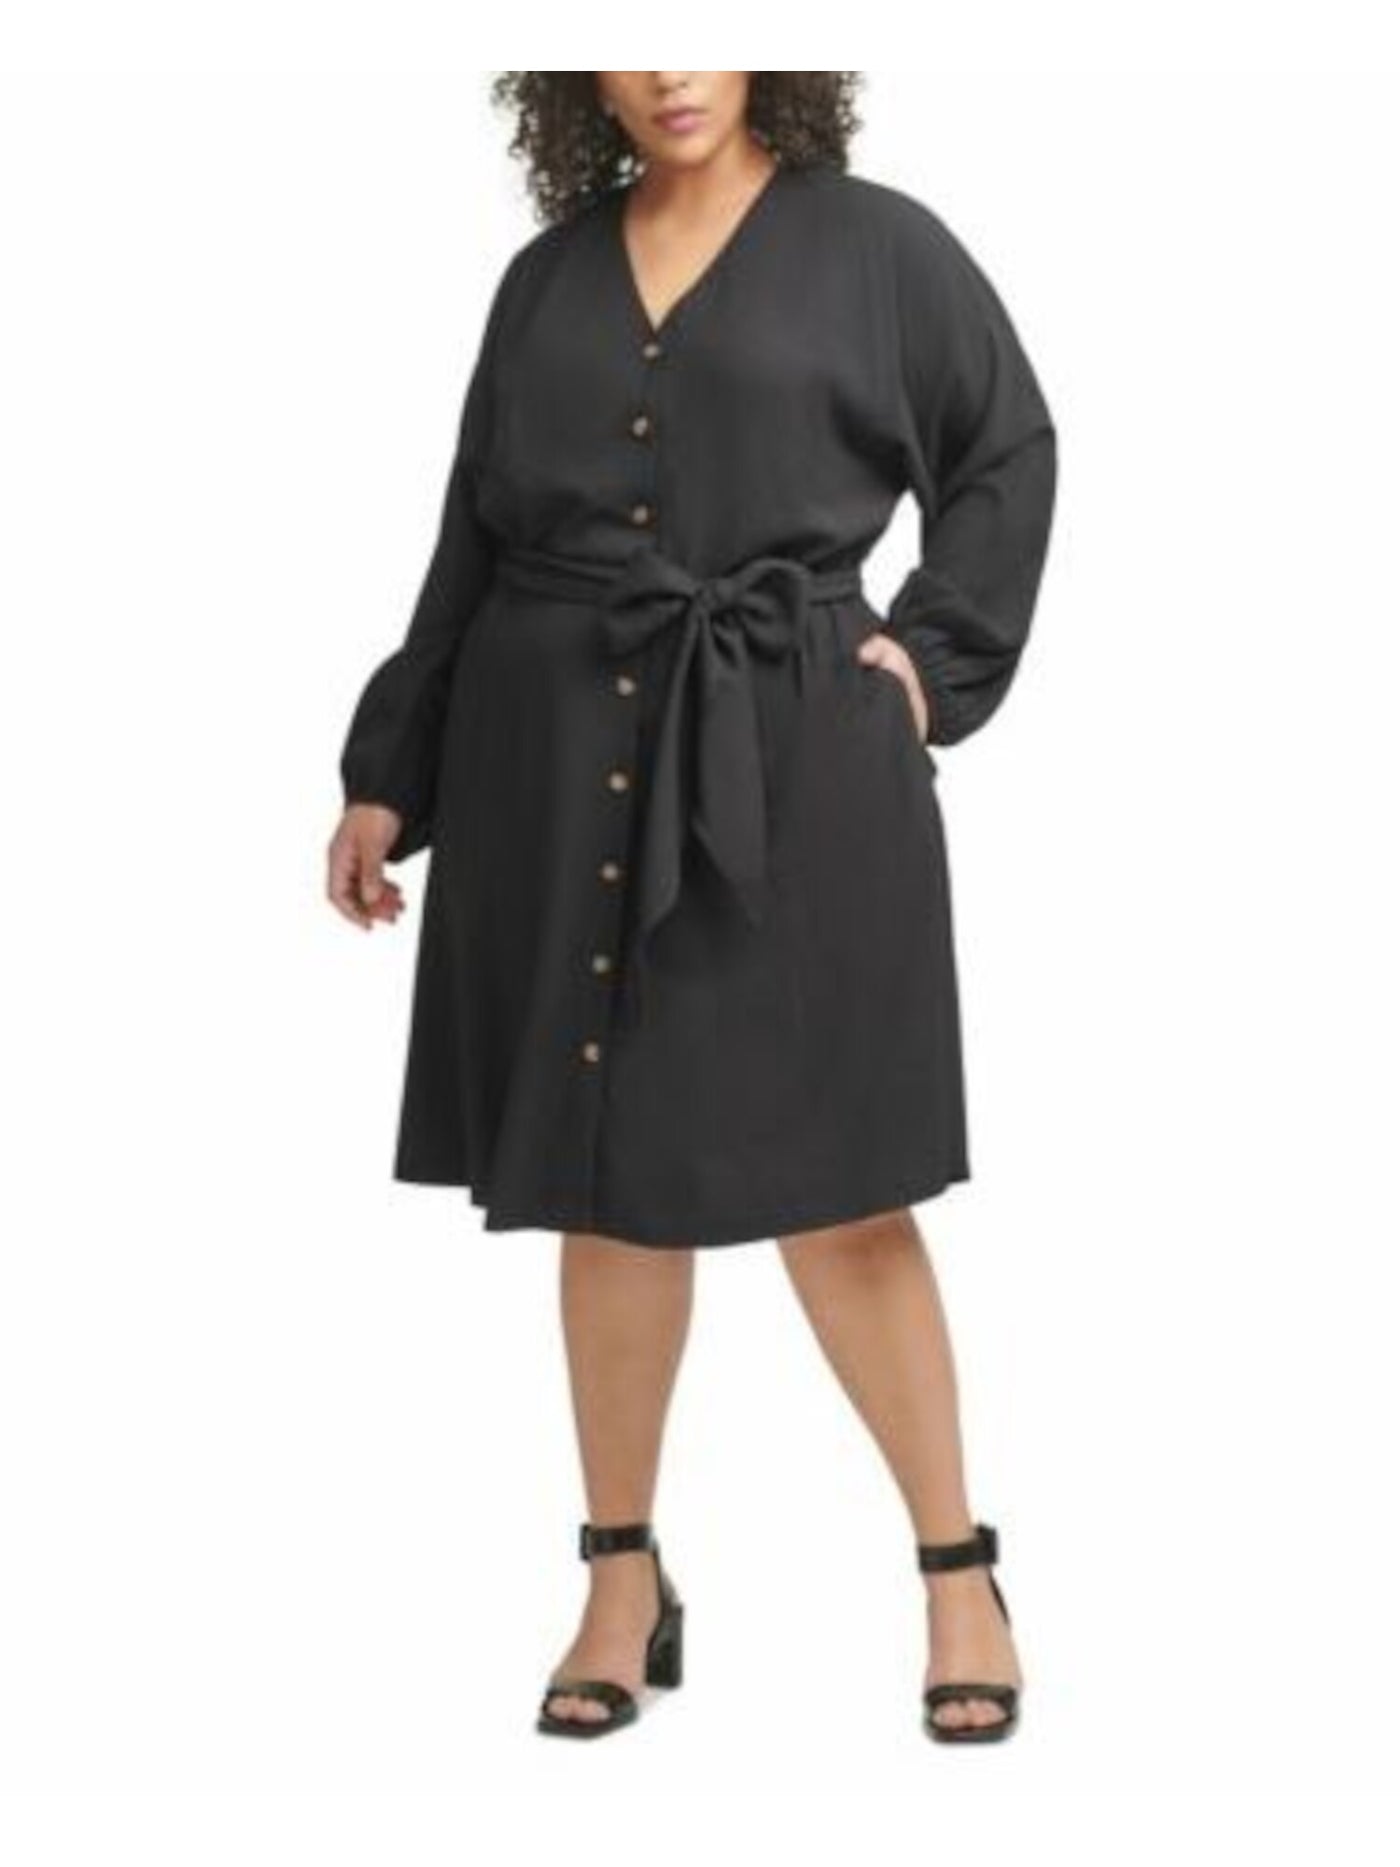 CALVIN KLEIN Womens Black Pocketed Belted Roll-tab Sleeve Collared Knee Length Shirt Dress Plus 1X